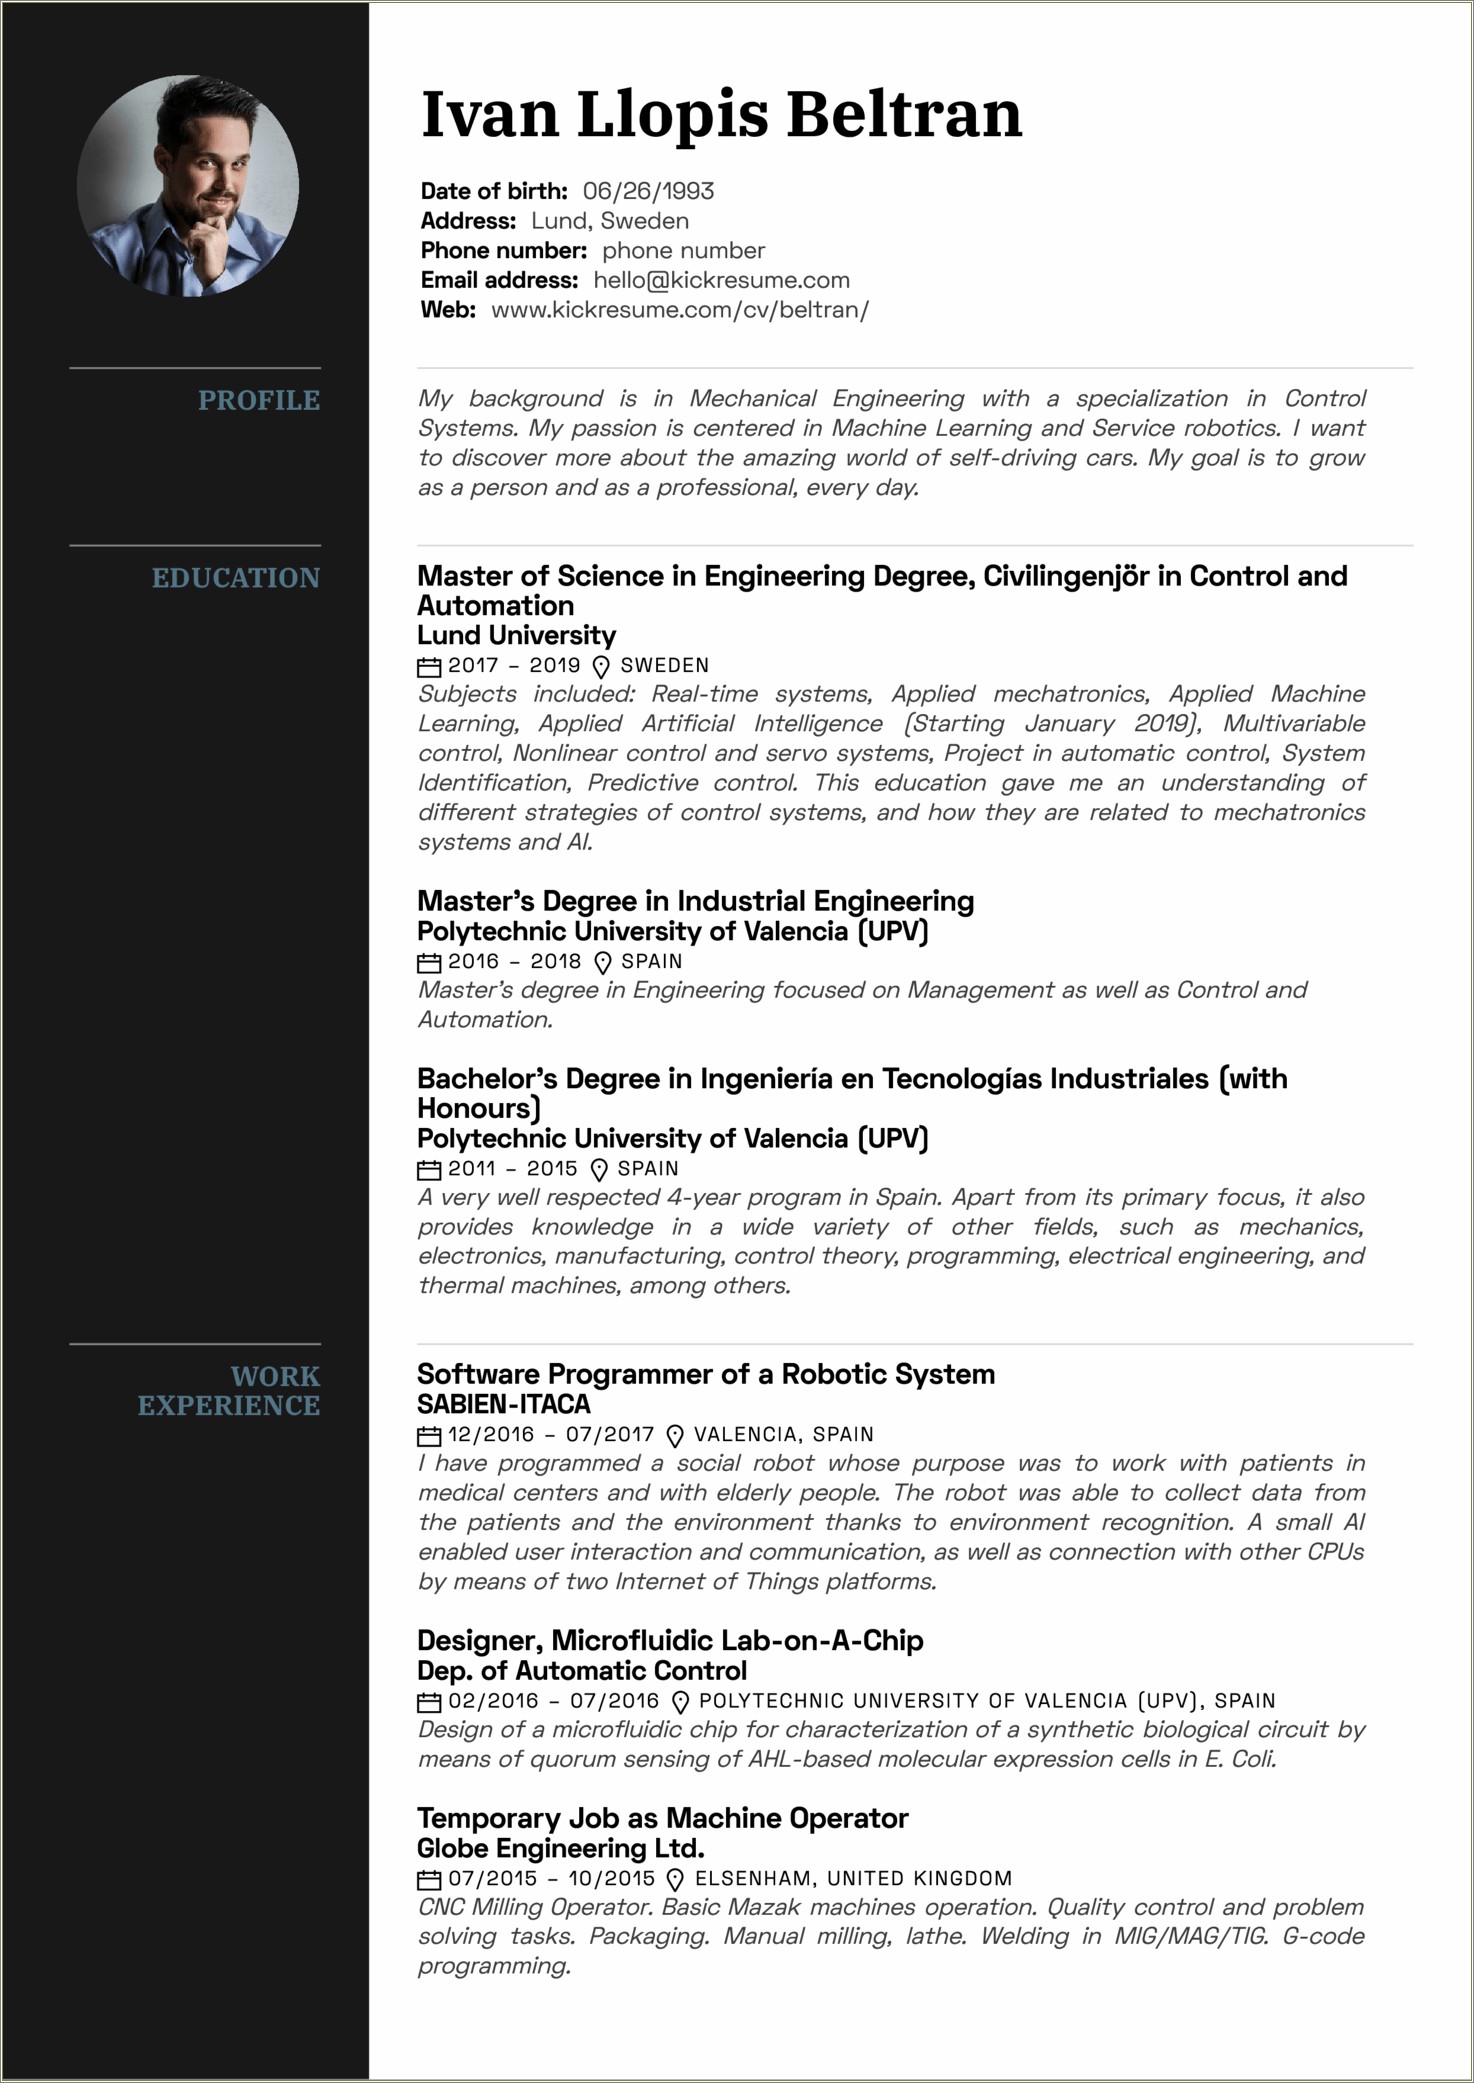 Example Of A Mechanical Engineer Resume